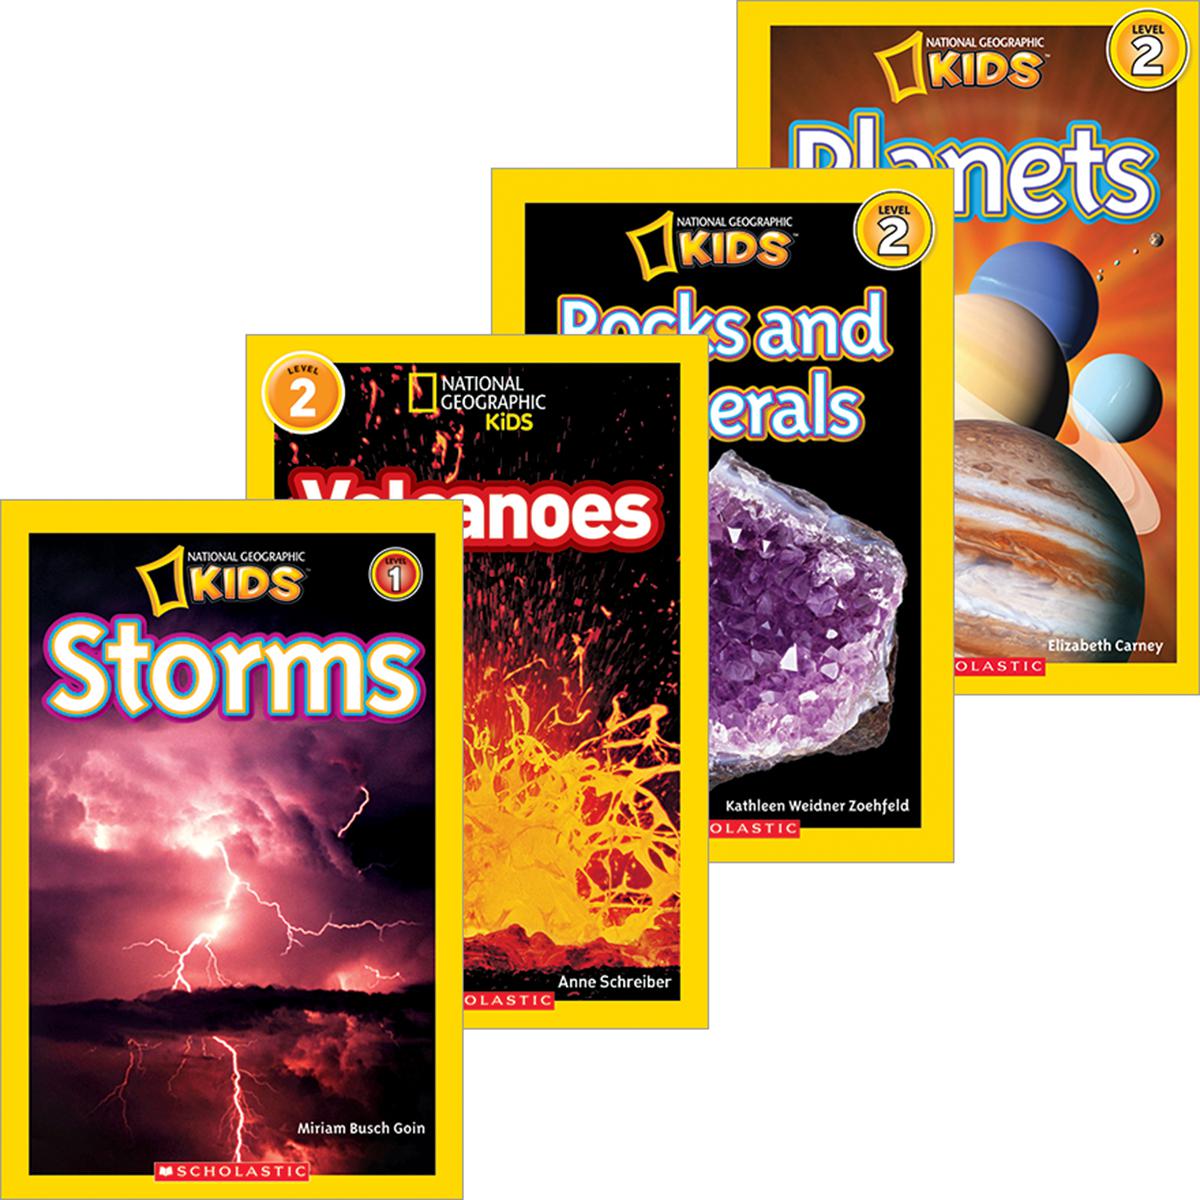  National Geographic Kids: Earth Science Pack 